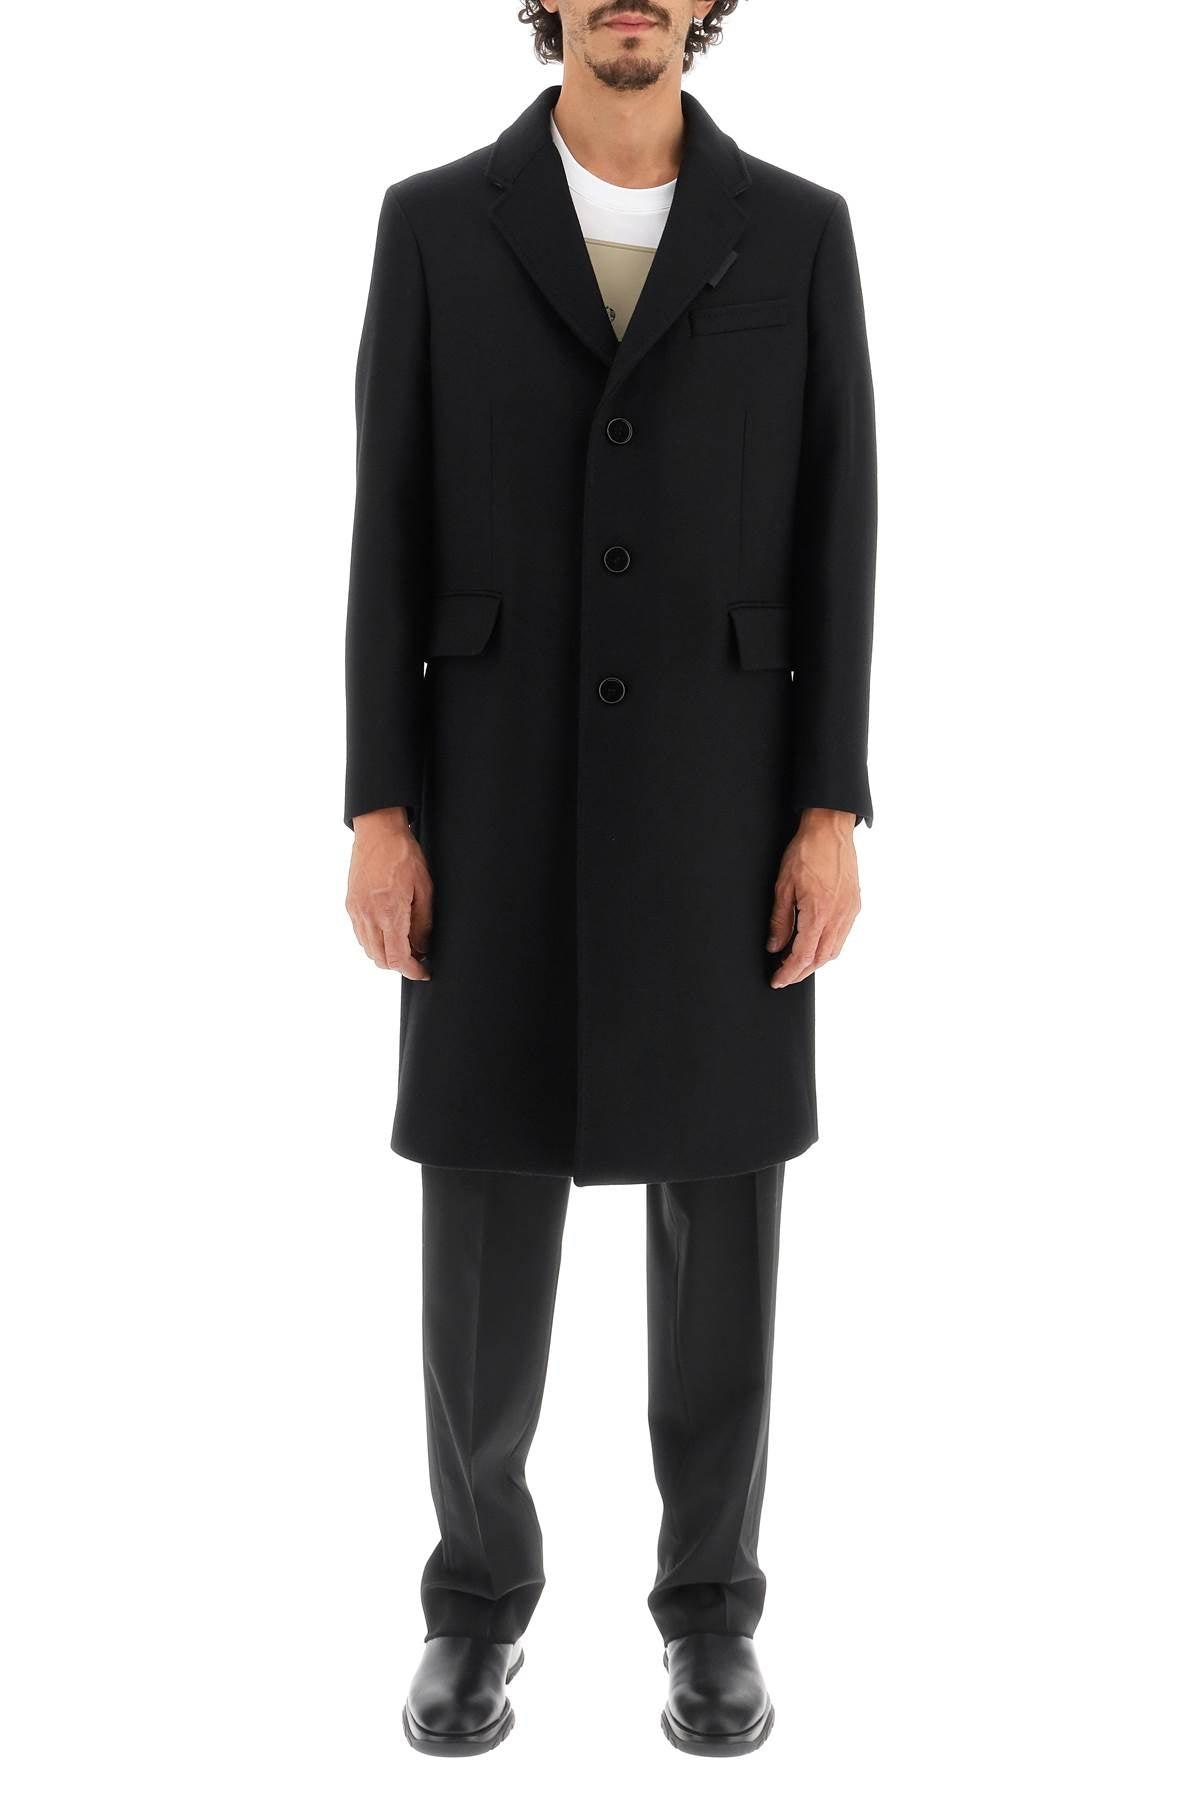 Burberry Wool And Cashmere Coat With Patch in Black for Men | Lyst